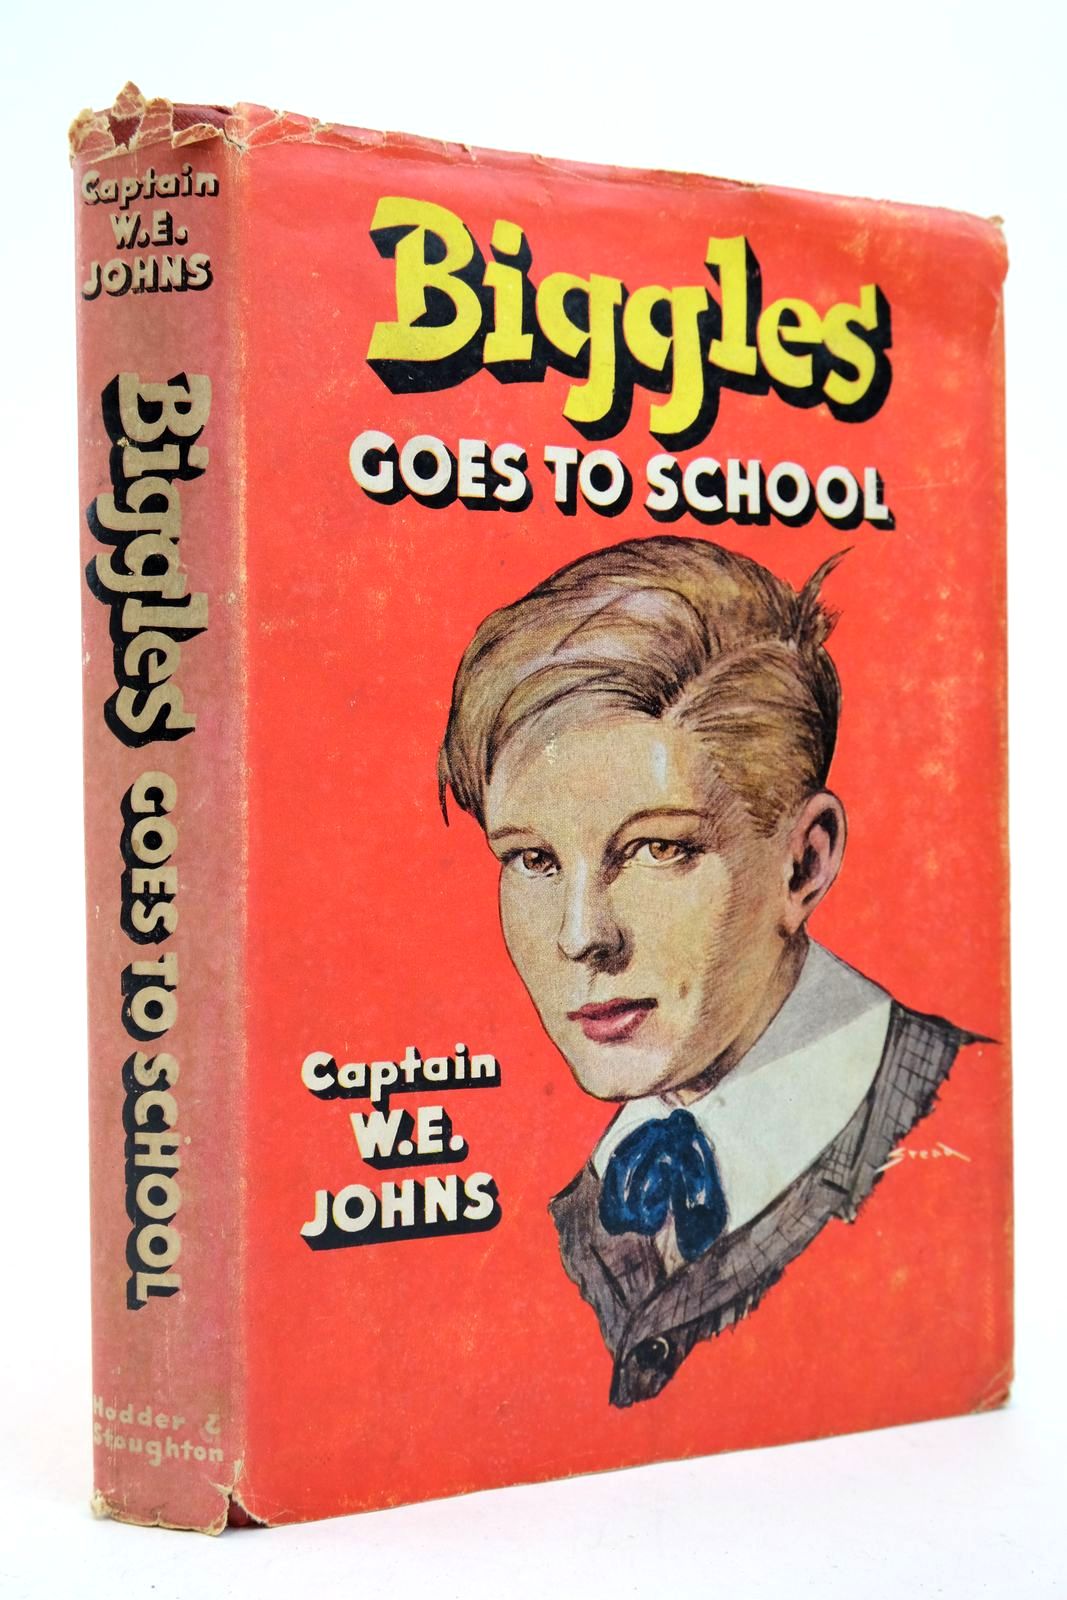 Photo of BIGGLES GOES TO SCHOOL written by Johns, W.E. illustrated by Stead,  published by Hodder &amp; Stoughton (STOCK CODE: 2139727)  for sale by Stella & Rose's Books